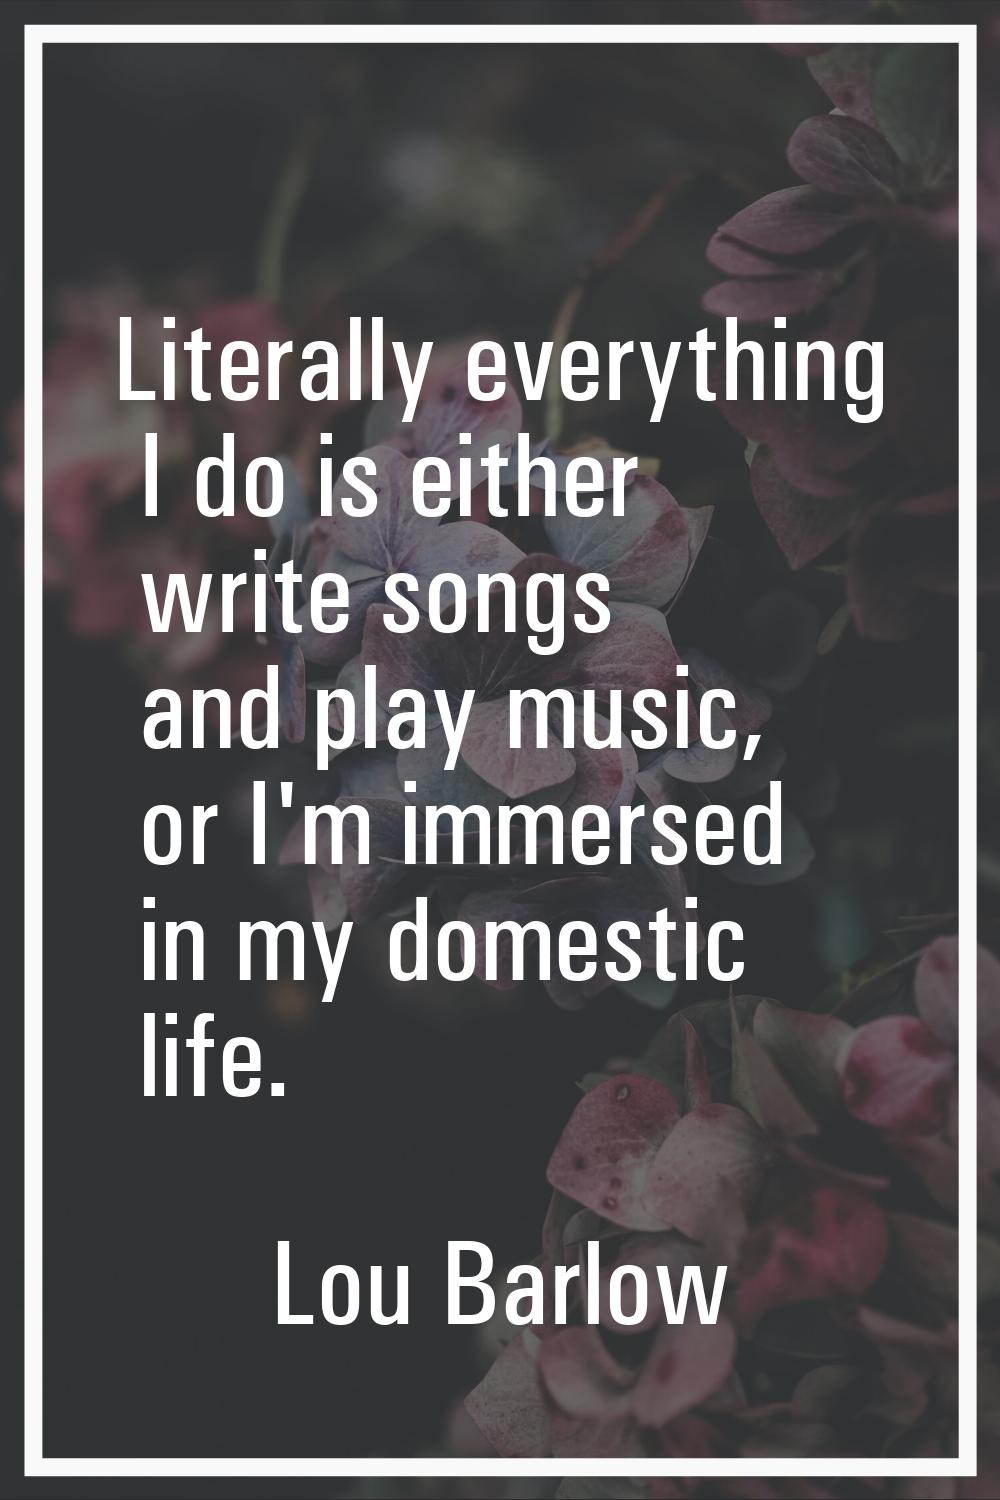 Literally everything I do is either write songs and play music, or I'm immersed in my domestic life